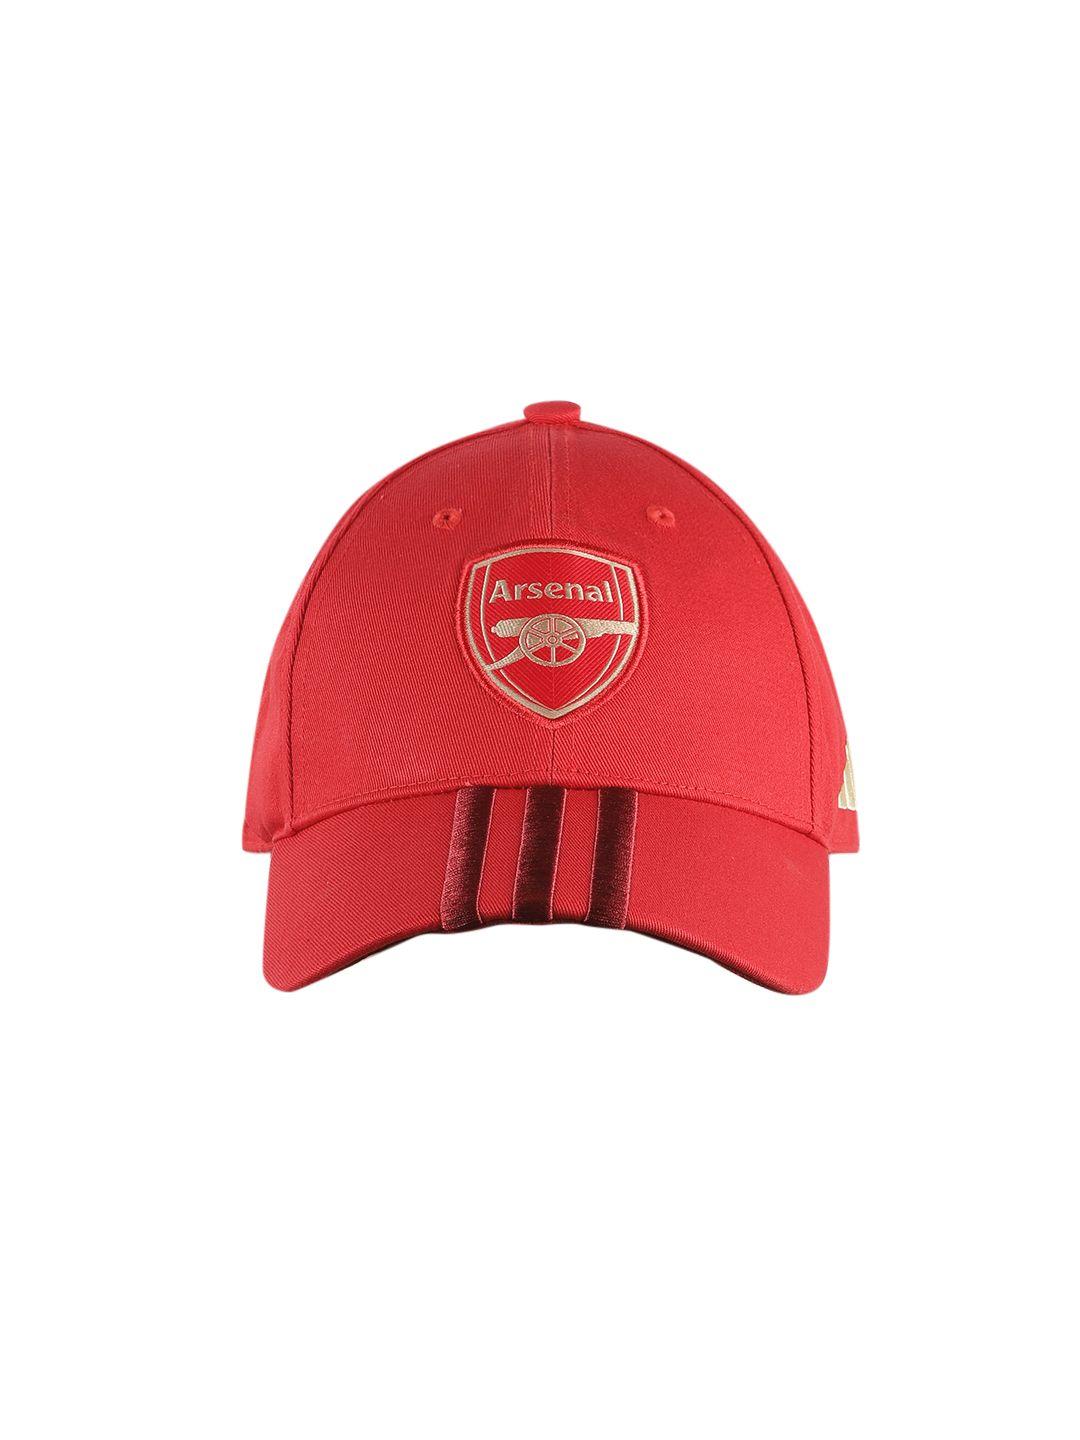 adidas-unisex-embroidered-cotton-afc-arsenal-football-baseball-cap-with-applique-detail